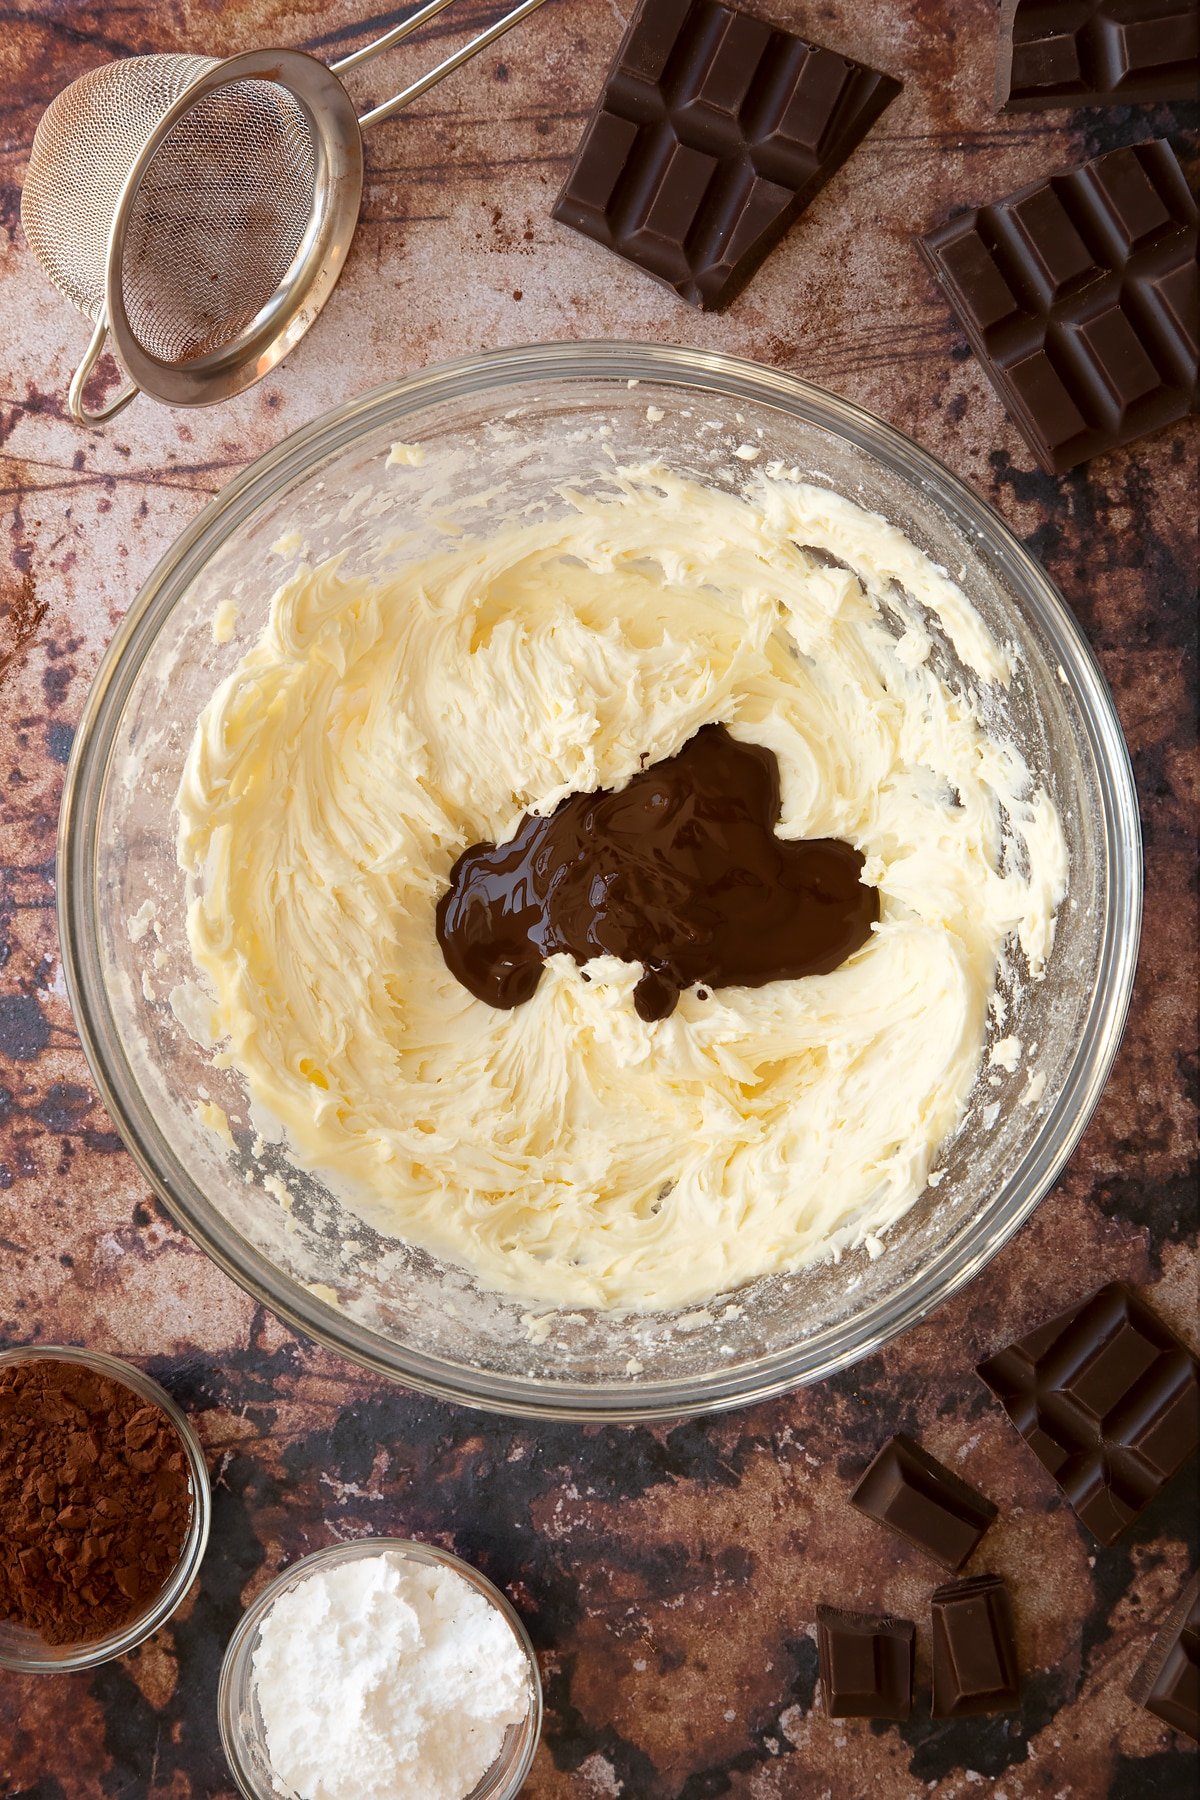 Butter, milk, vanilla and icing sugar whisked together in a glass mixing bowl with dark chocolate on top. Ingredients for the caterpillar cake recipe surround the bowl.